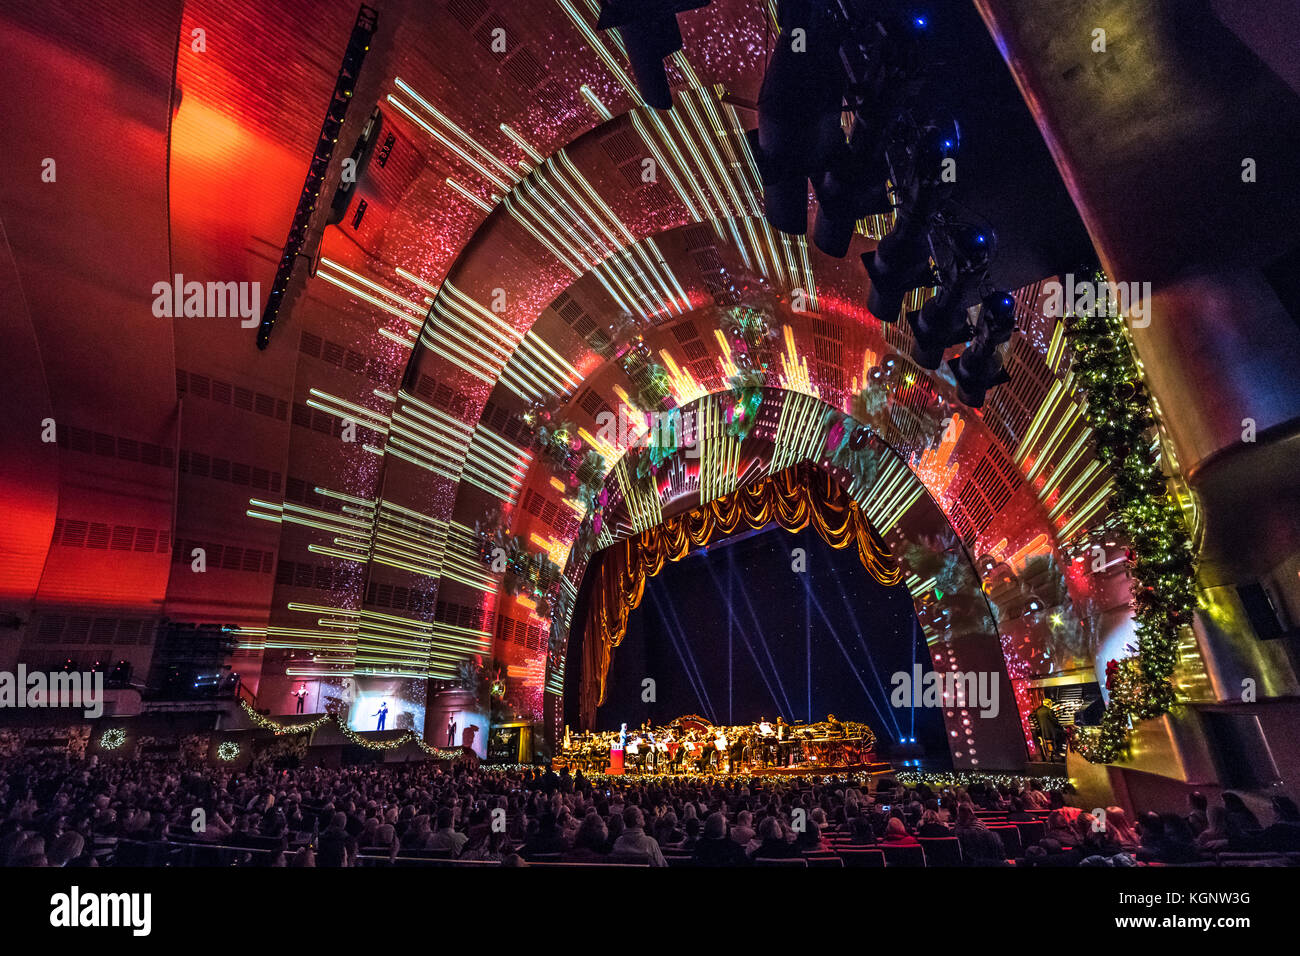 New York, USA, 10 Nov 2017. Opening day of the 2017 Christmas Spectacular  show at New York's Radio City Music Hall starring the Radio City Rockettes.  Photo by Enrique Shore/Alamy Live News